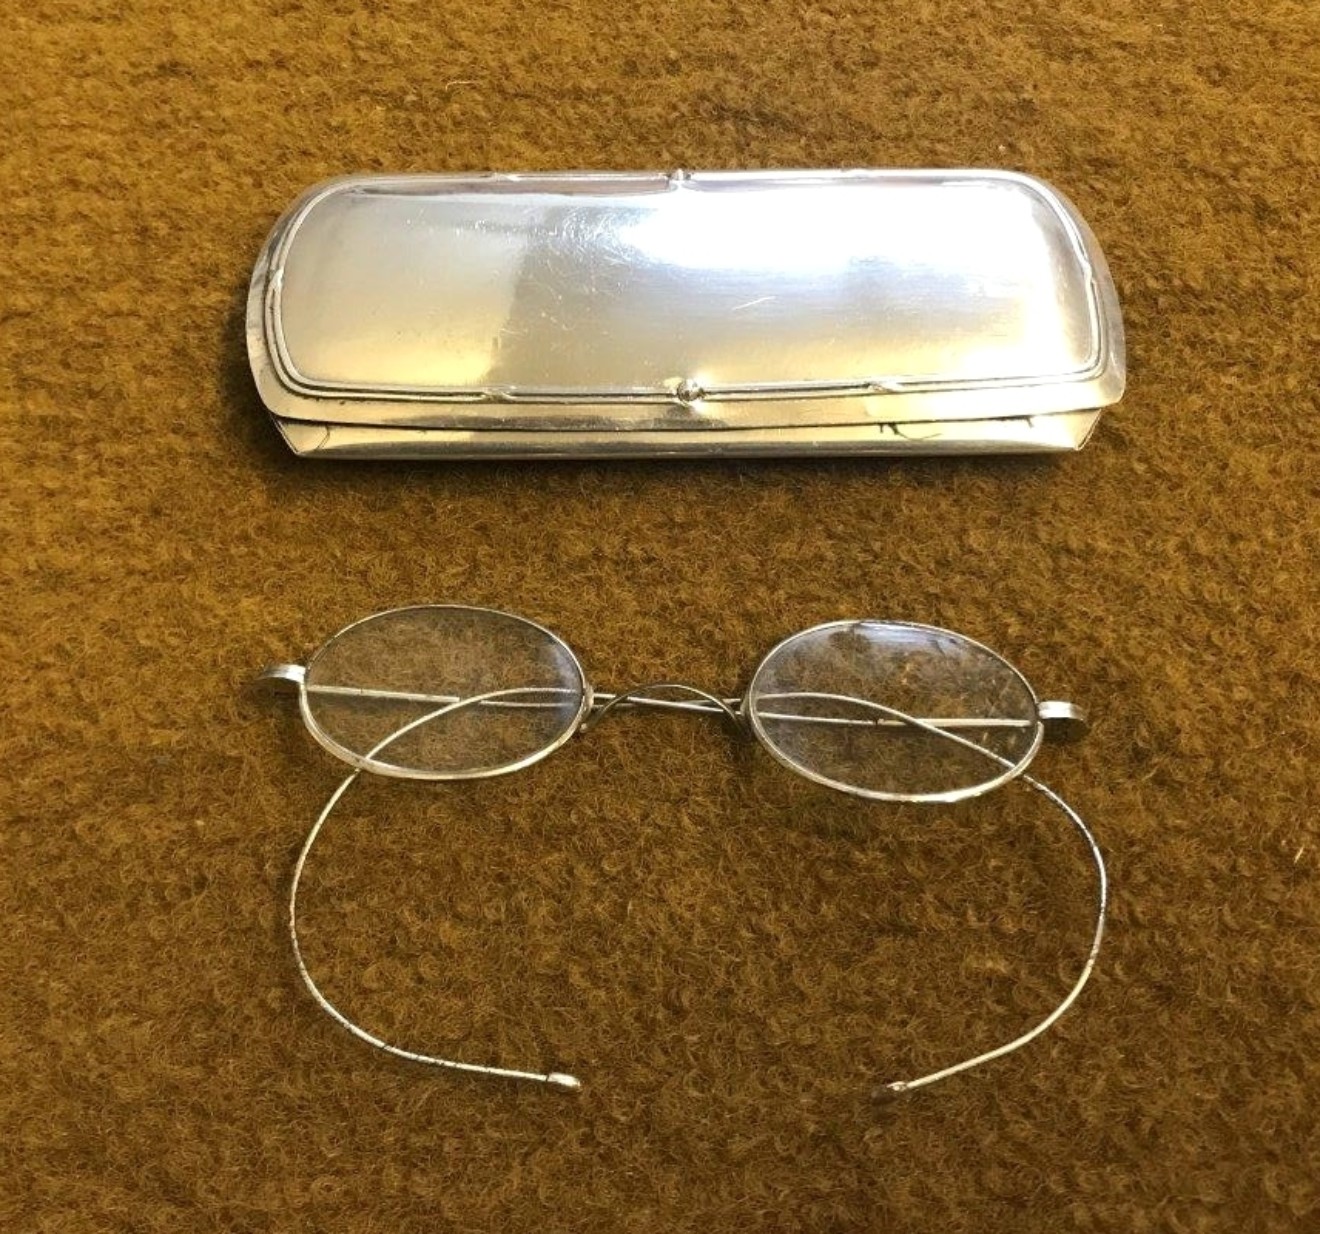 Antique Wire Rimmed Spectacles in Polished Case